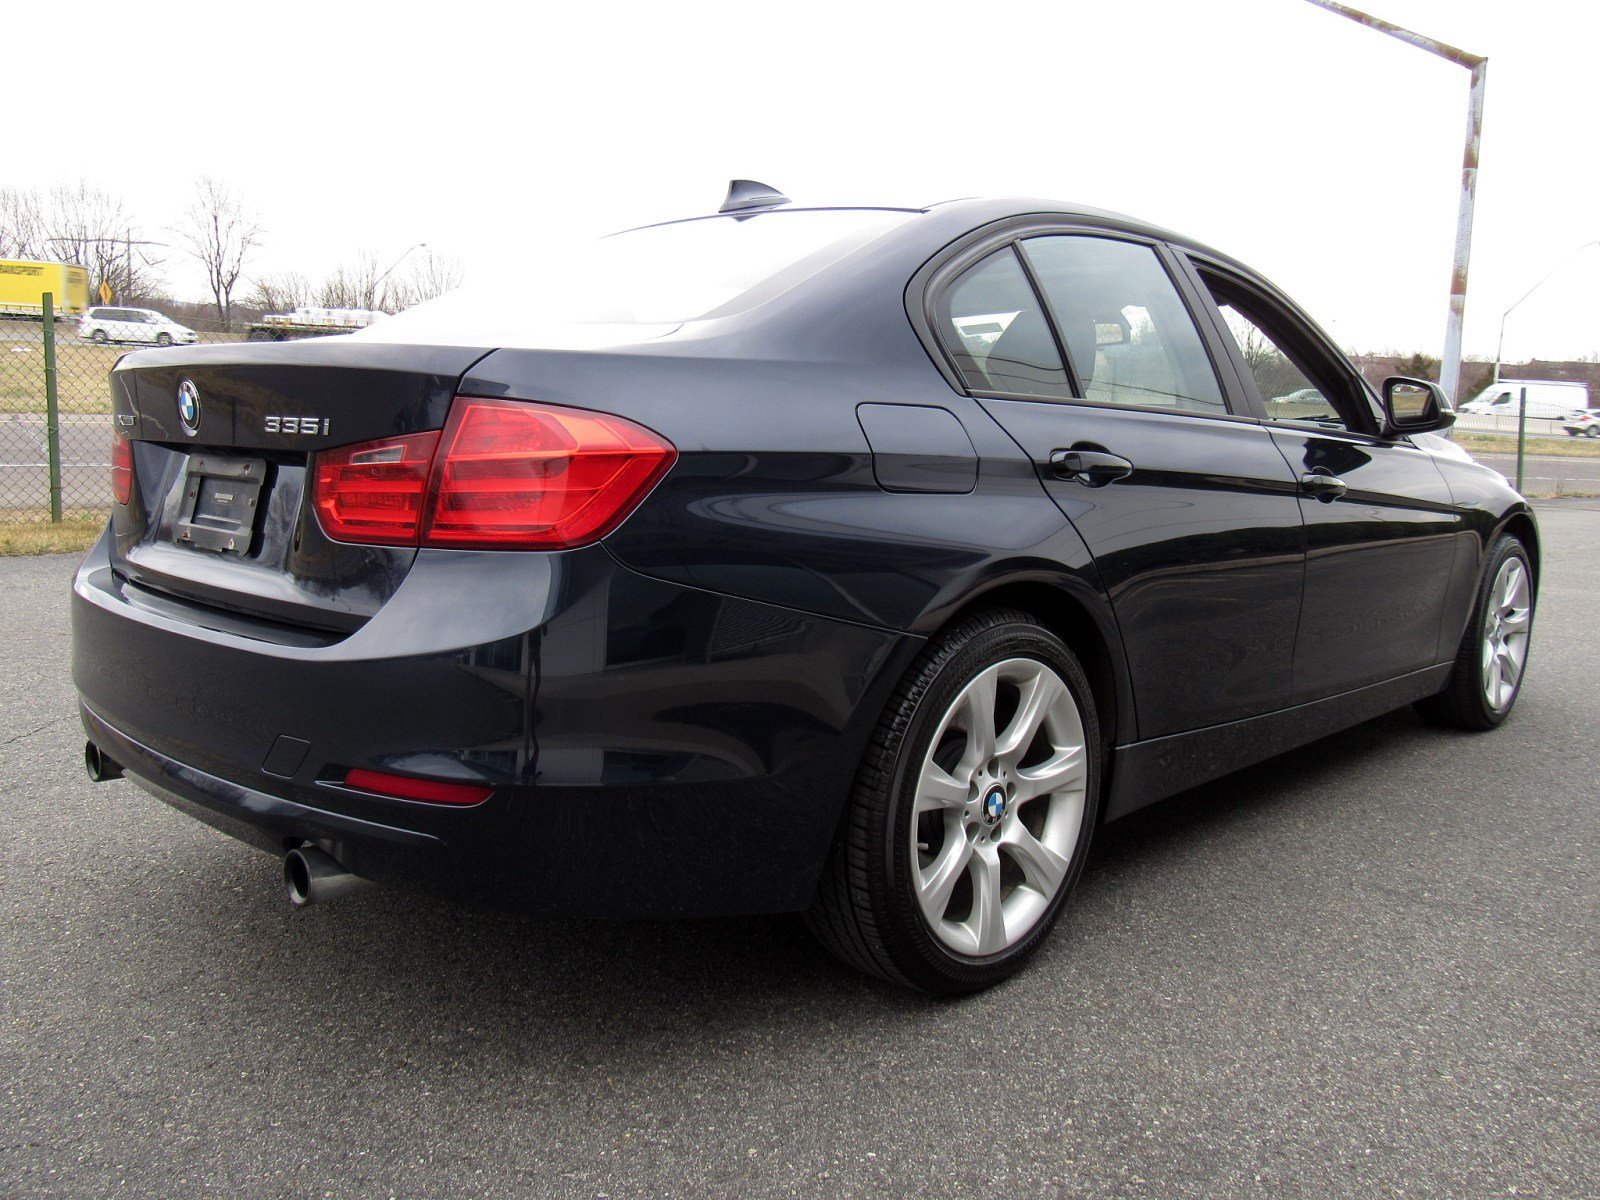 Pre-Owned 2013 BMW 3 Series in Allentown #F586204T | MINI of Allentown